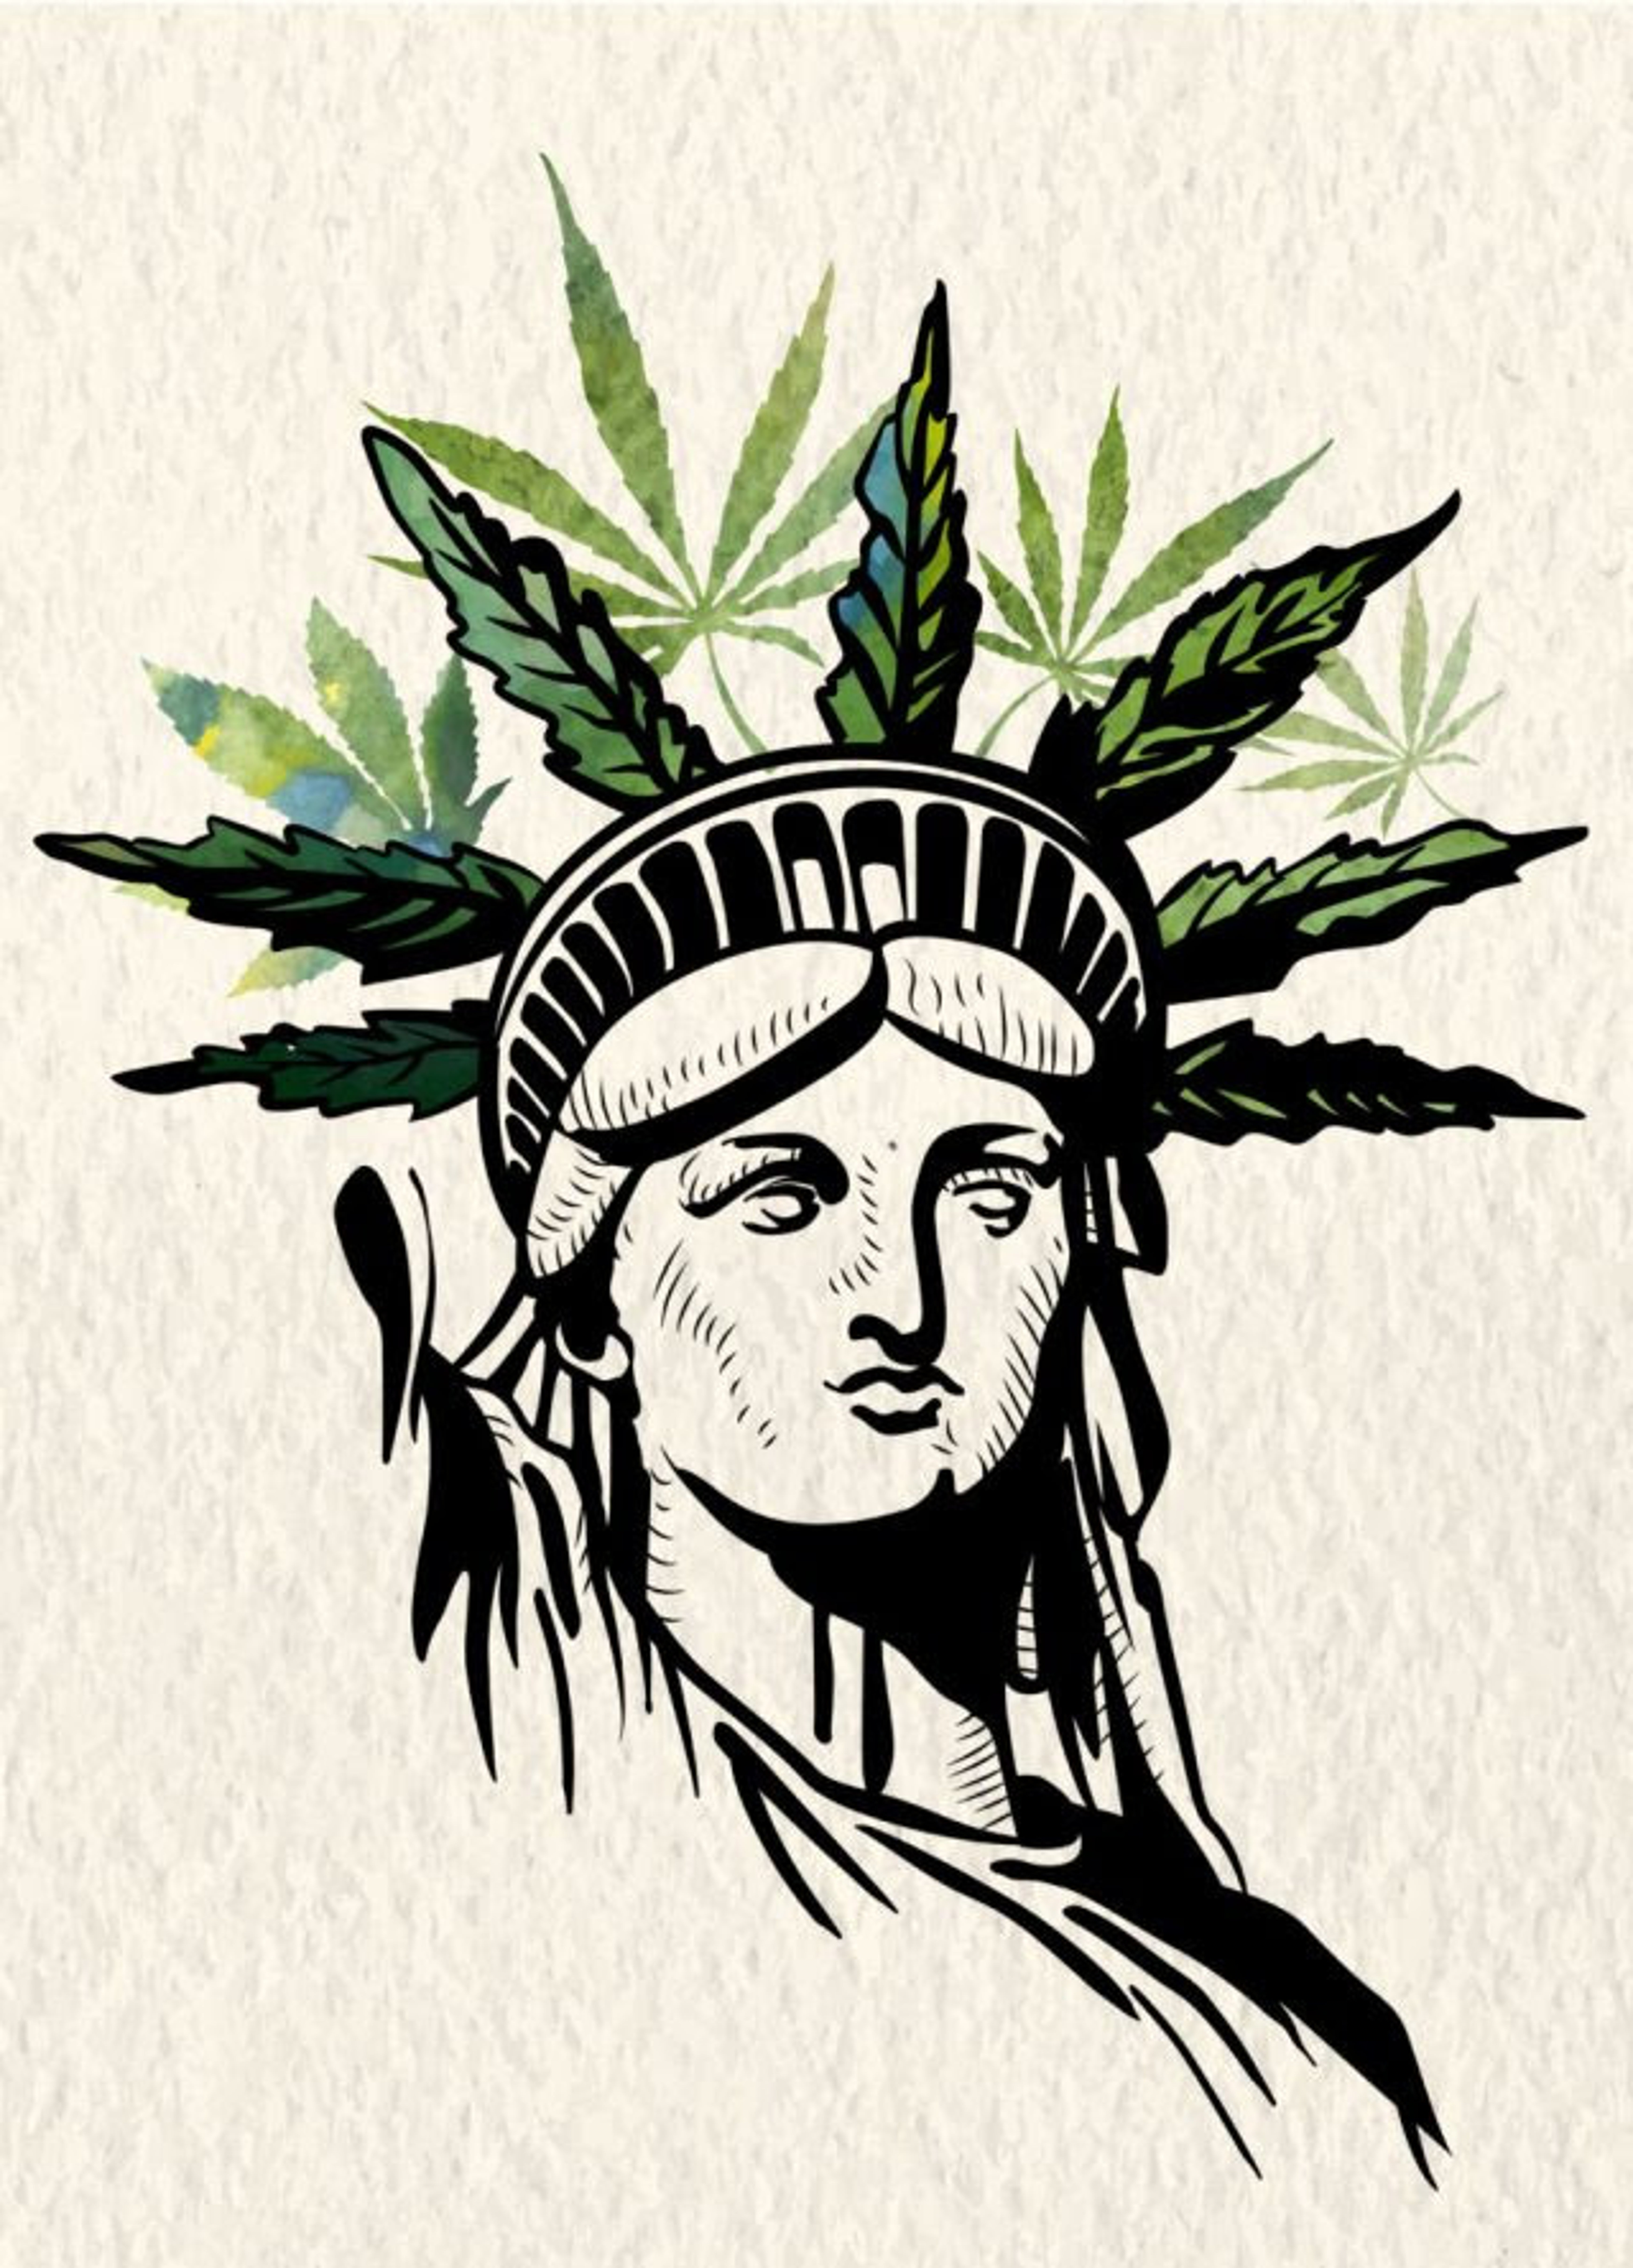 New York Report: Hemp Farmers Begin Cannabis Cultivation, Assembly Bill Pushes Hemp For Industrial &amp; Packaging Use